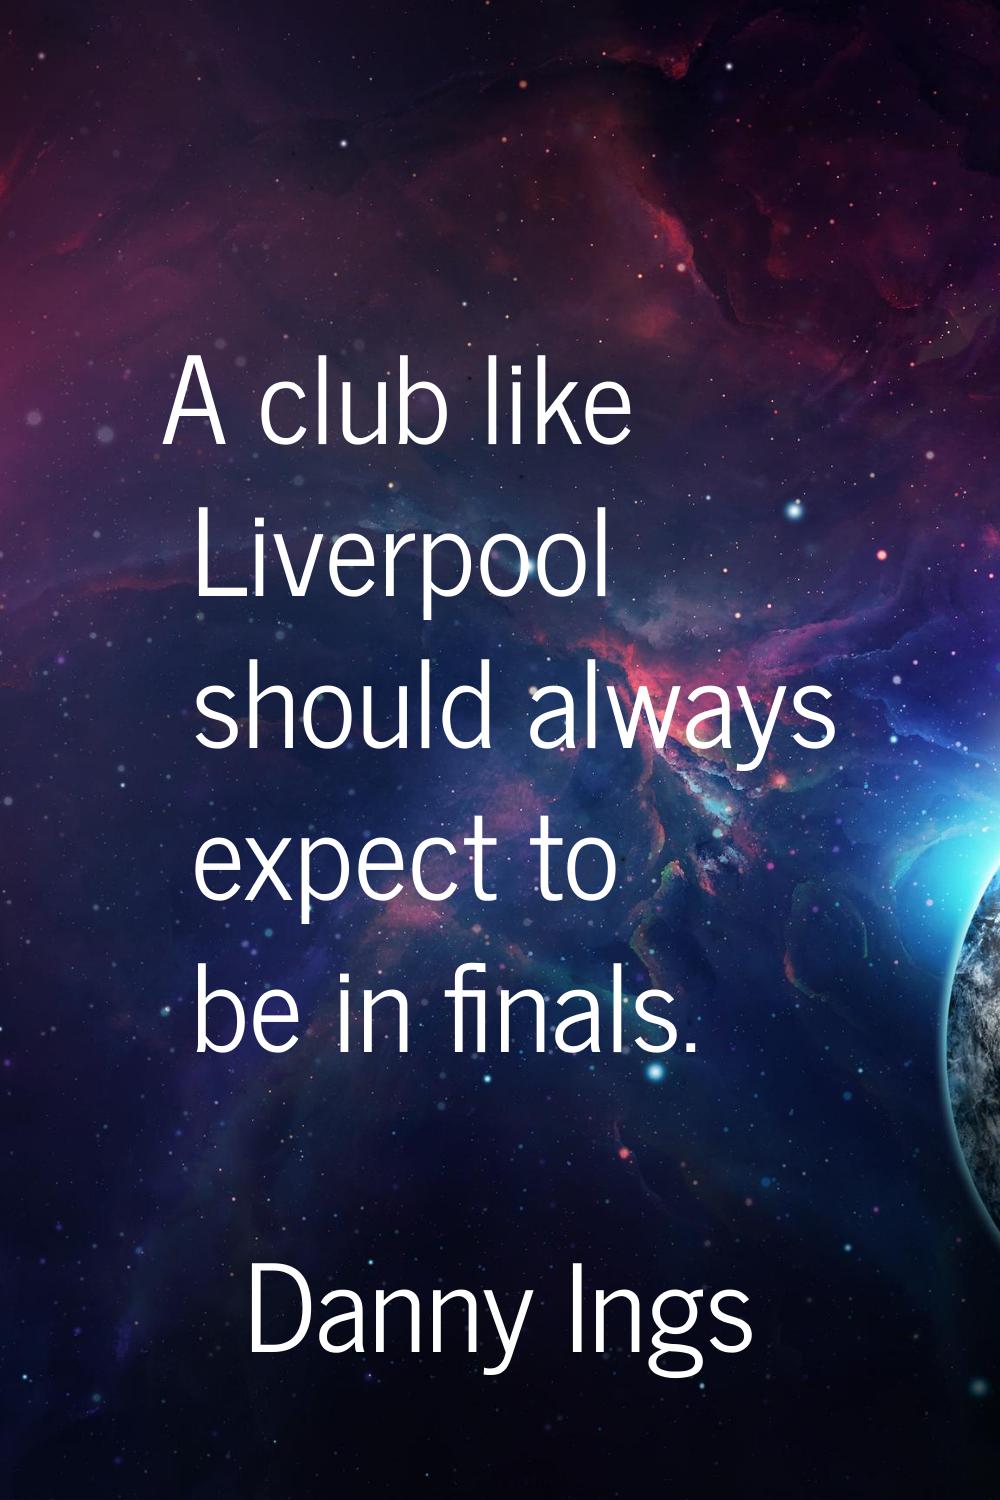 A club like Liverpool should always expect to be in finals.